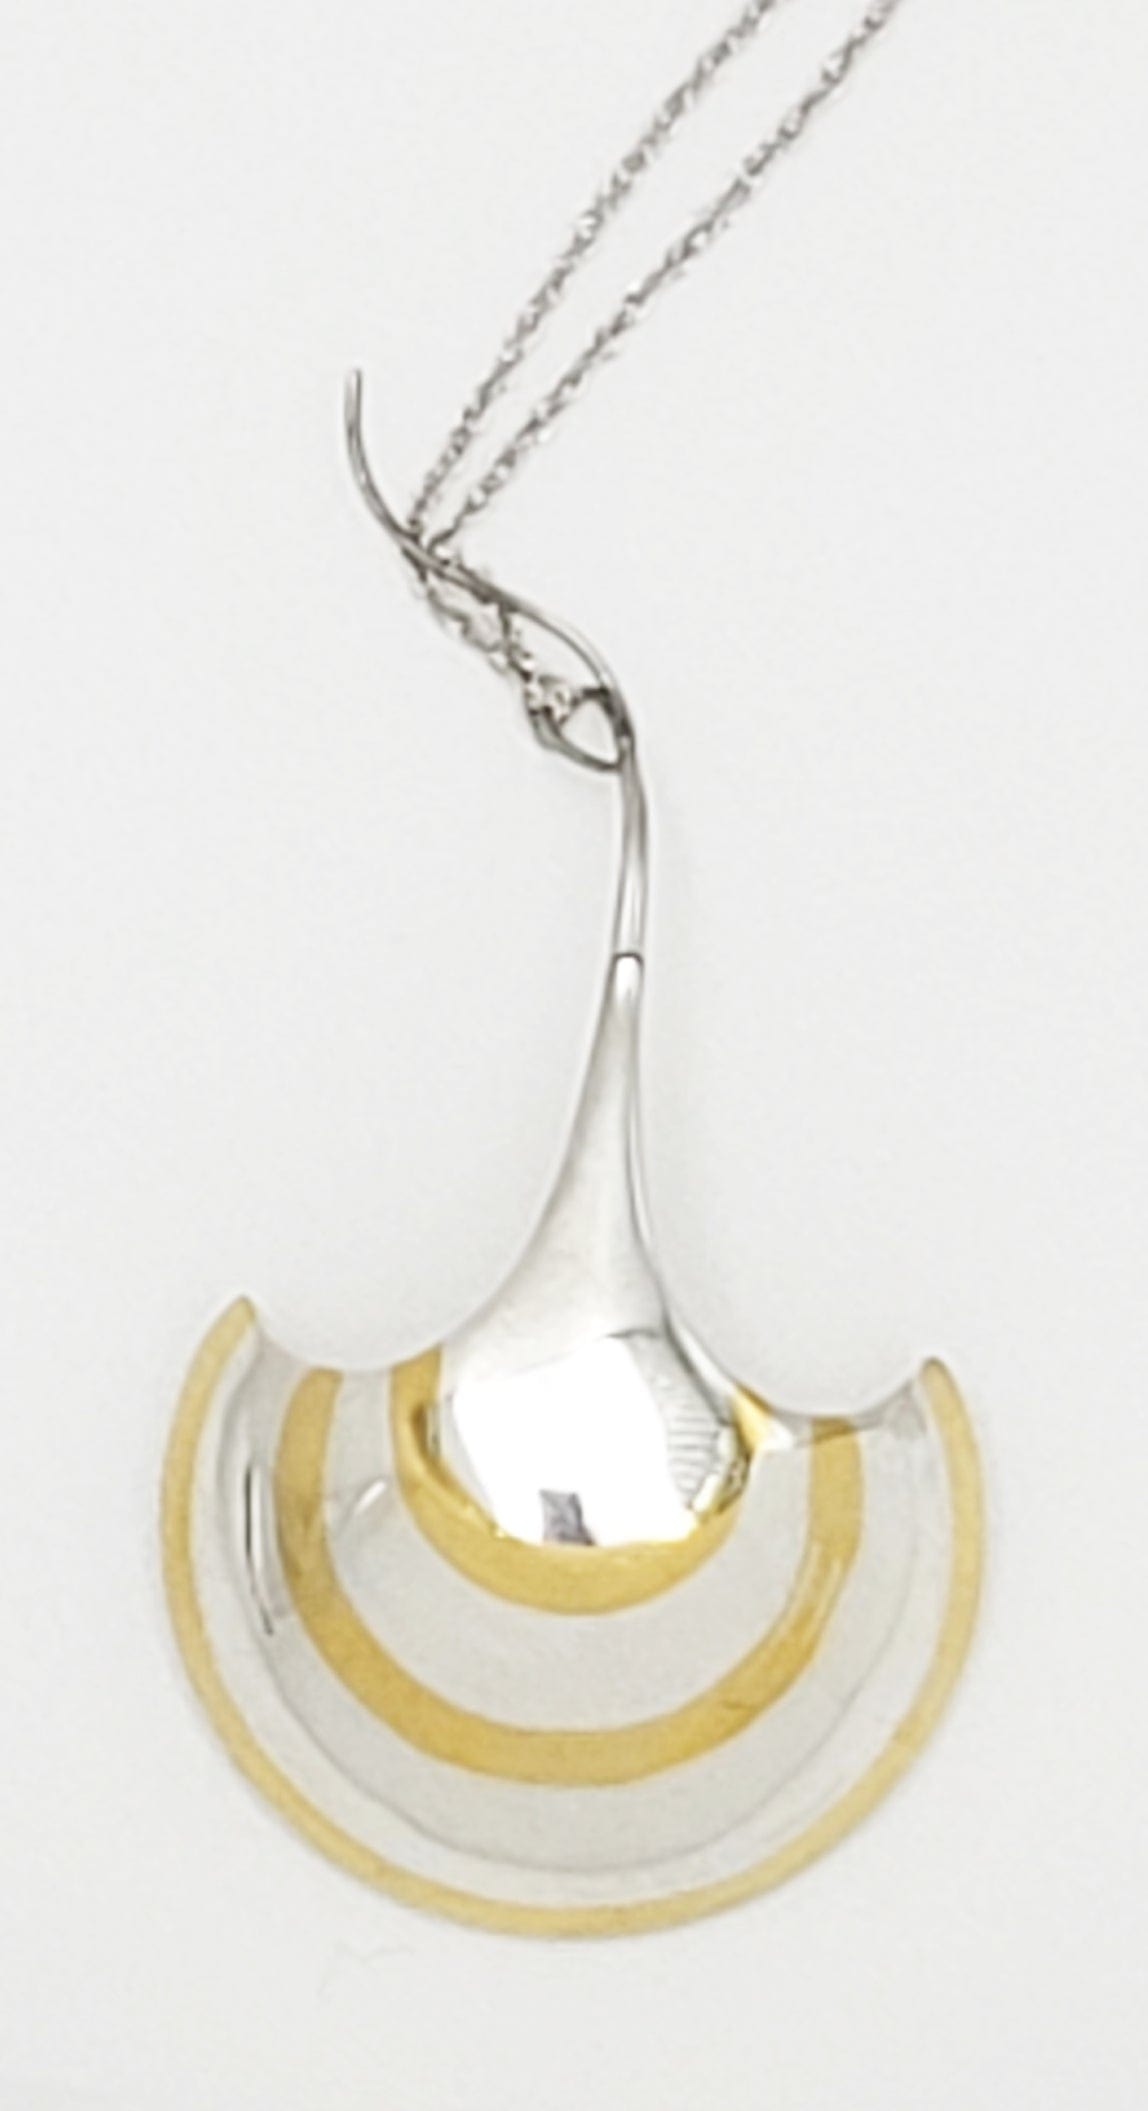 TMCMH Jewelry Designer Stingray Sterling Silver & 24k Gold Necklace